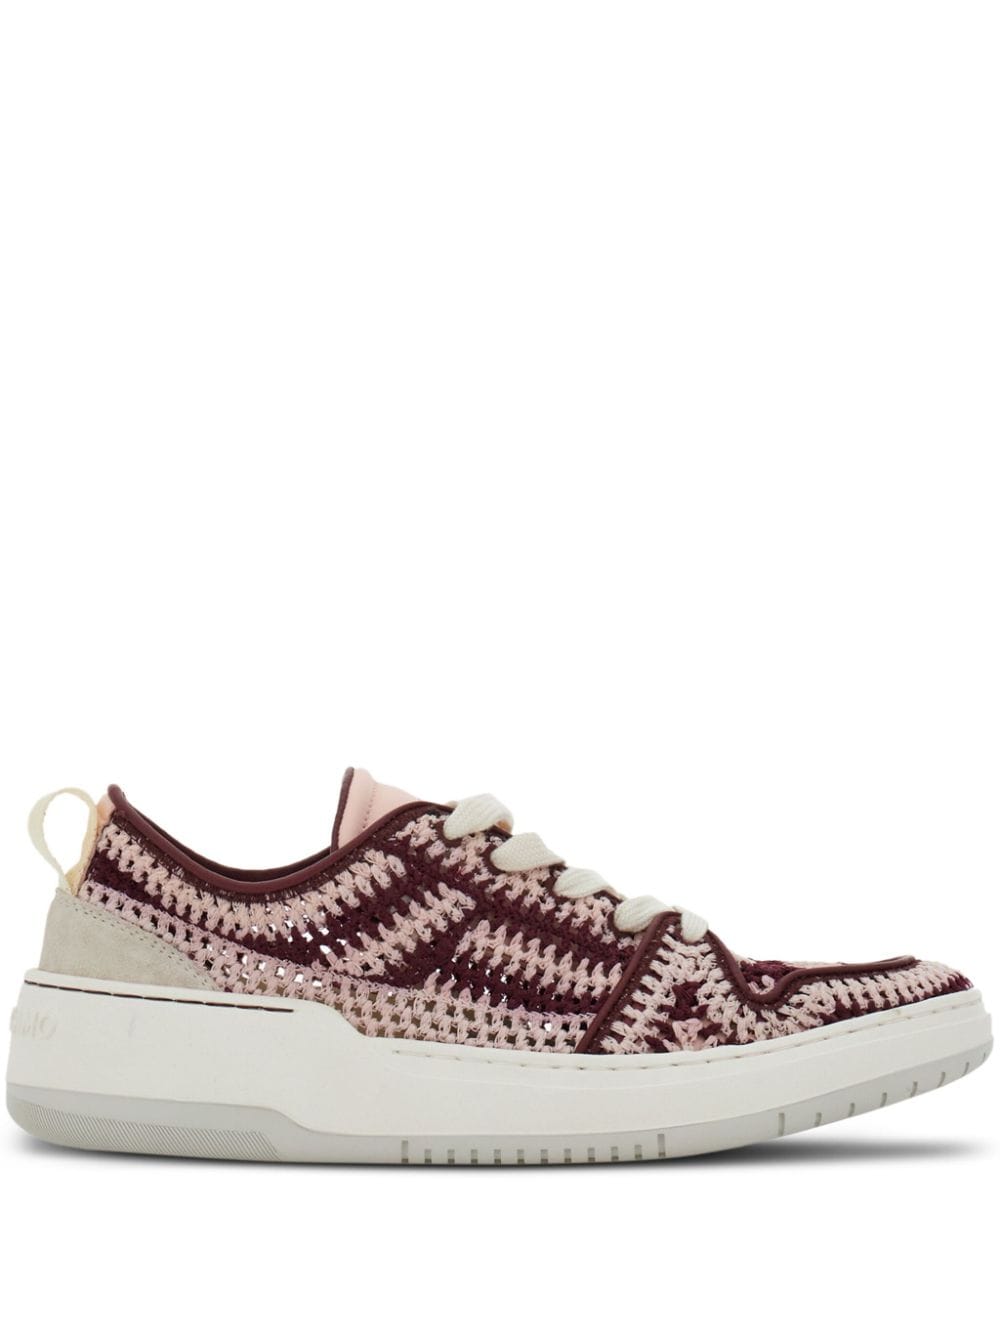 Image 1 of Ferragamo knitted low-top sneakers